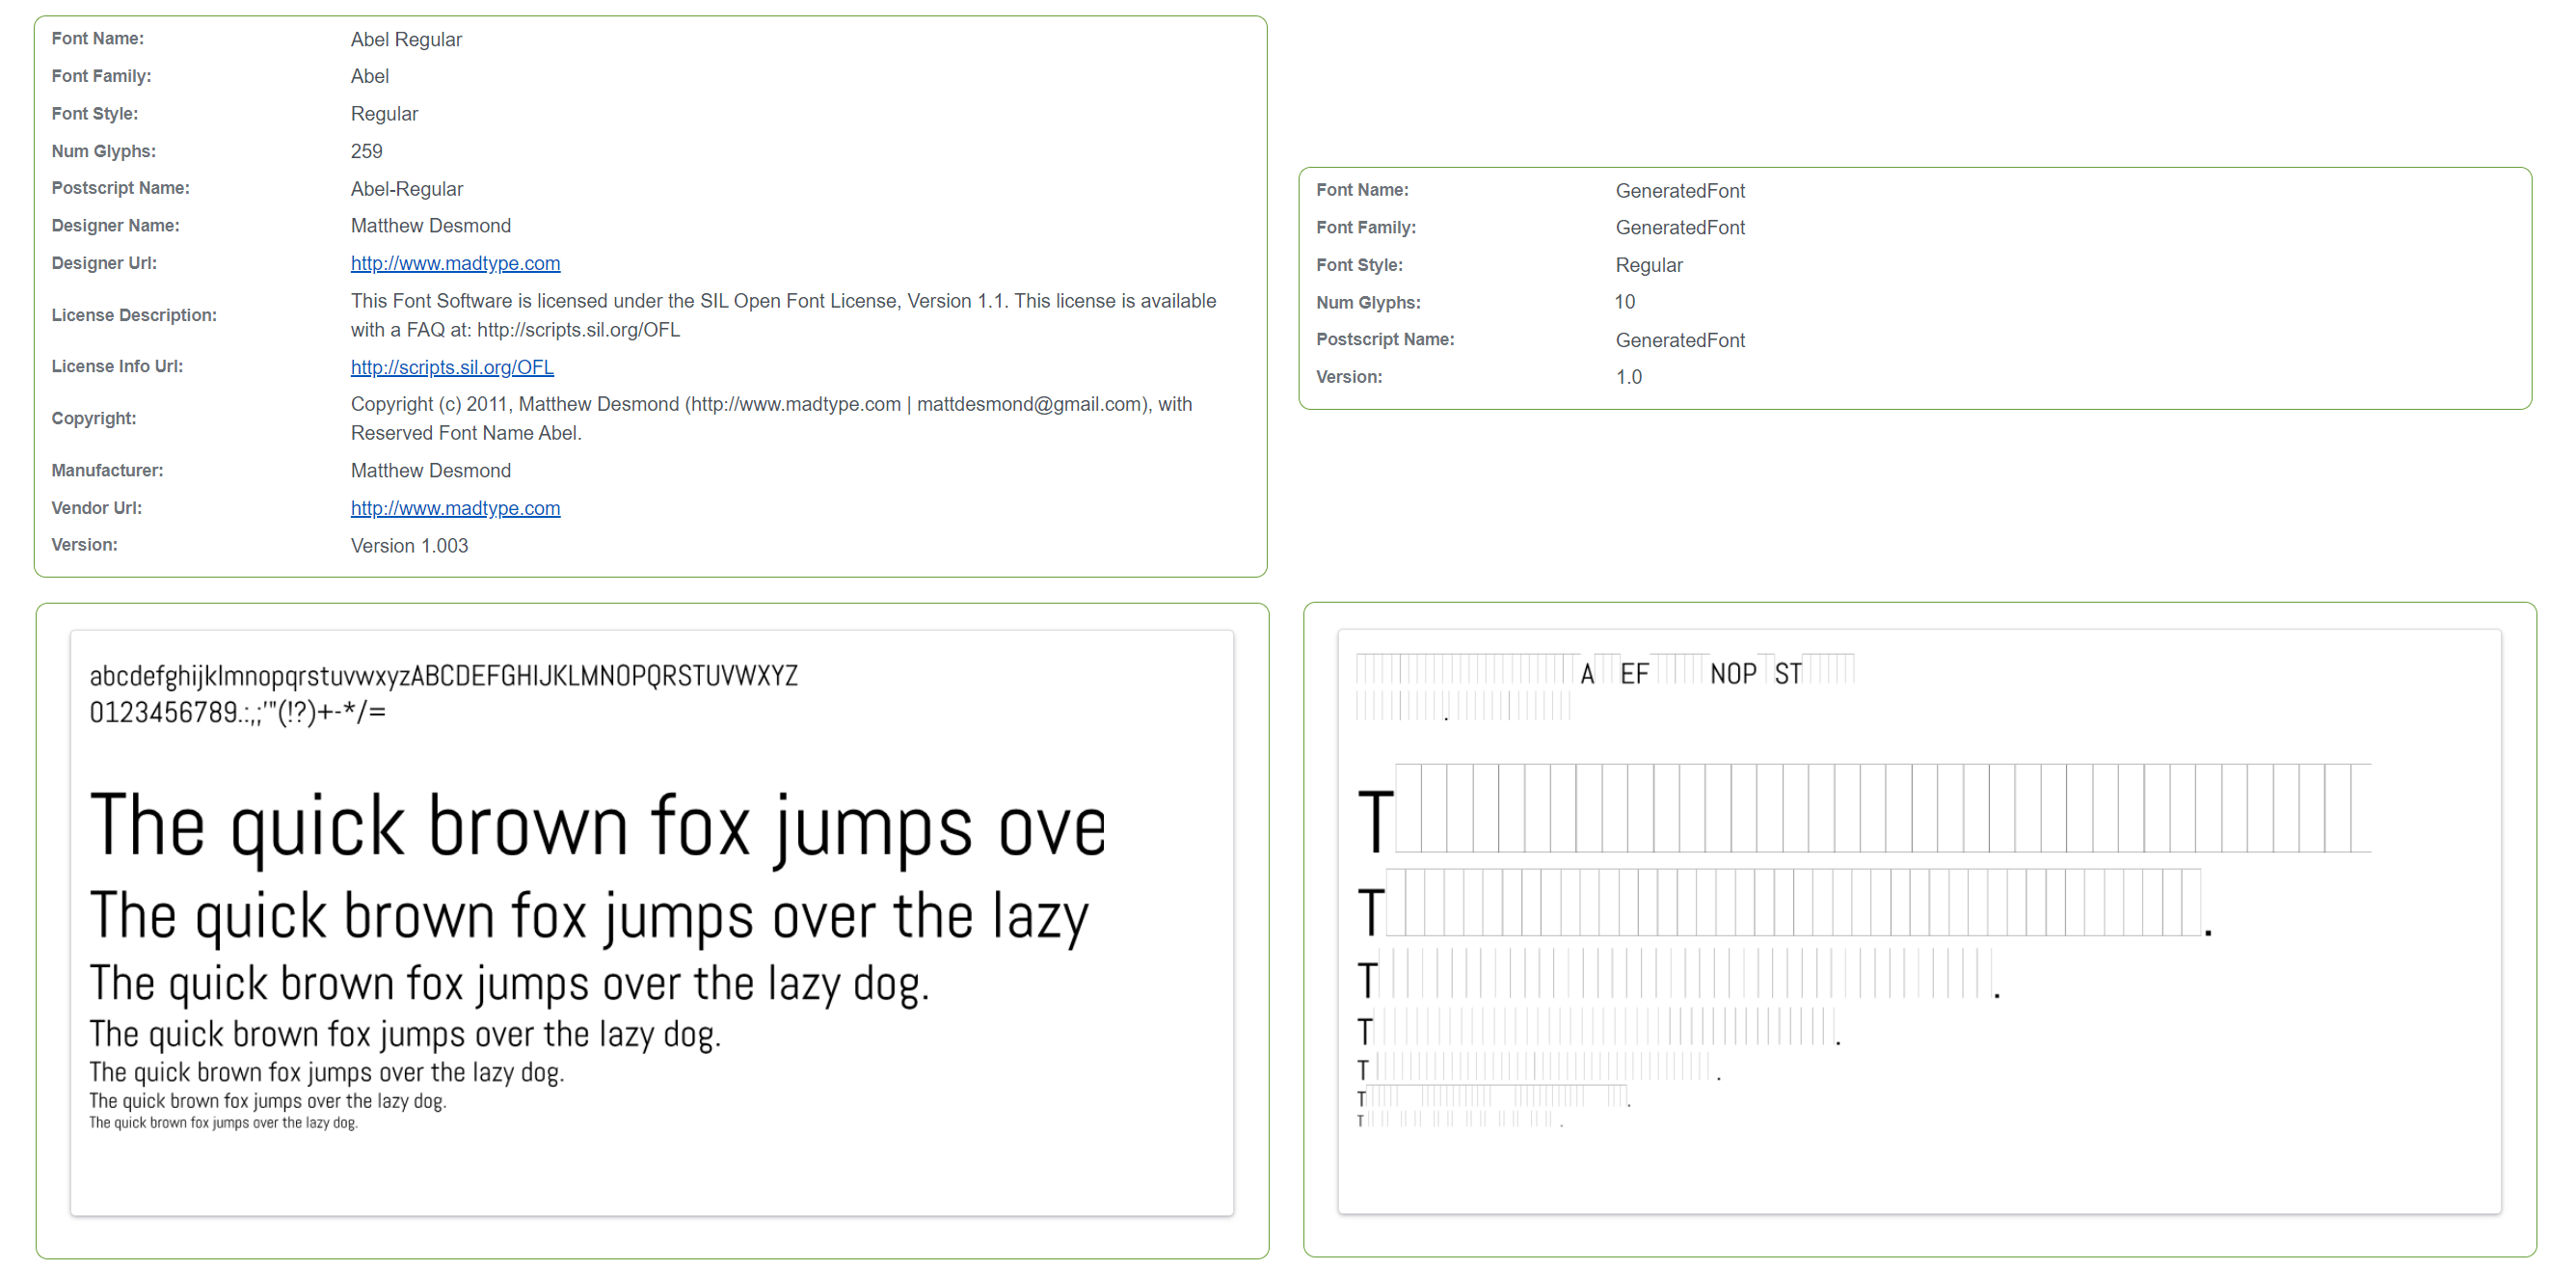 Comparison of two font files